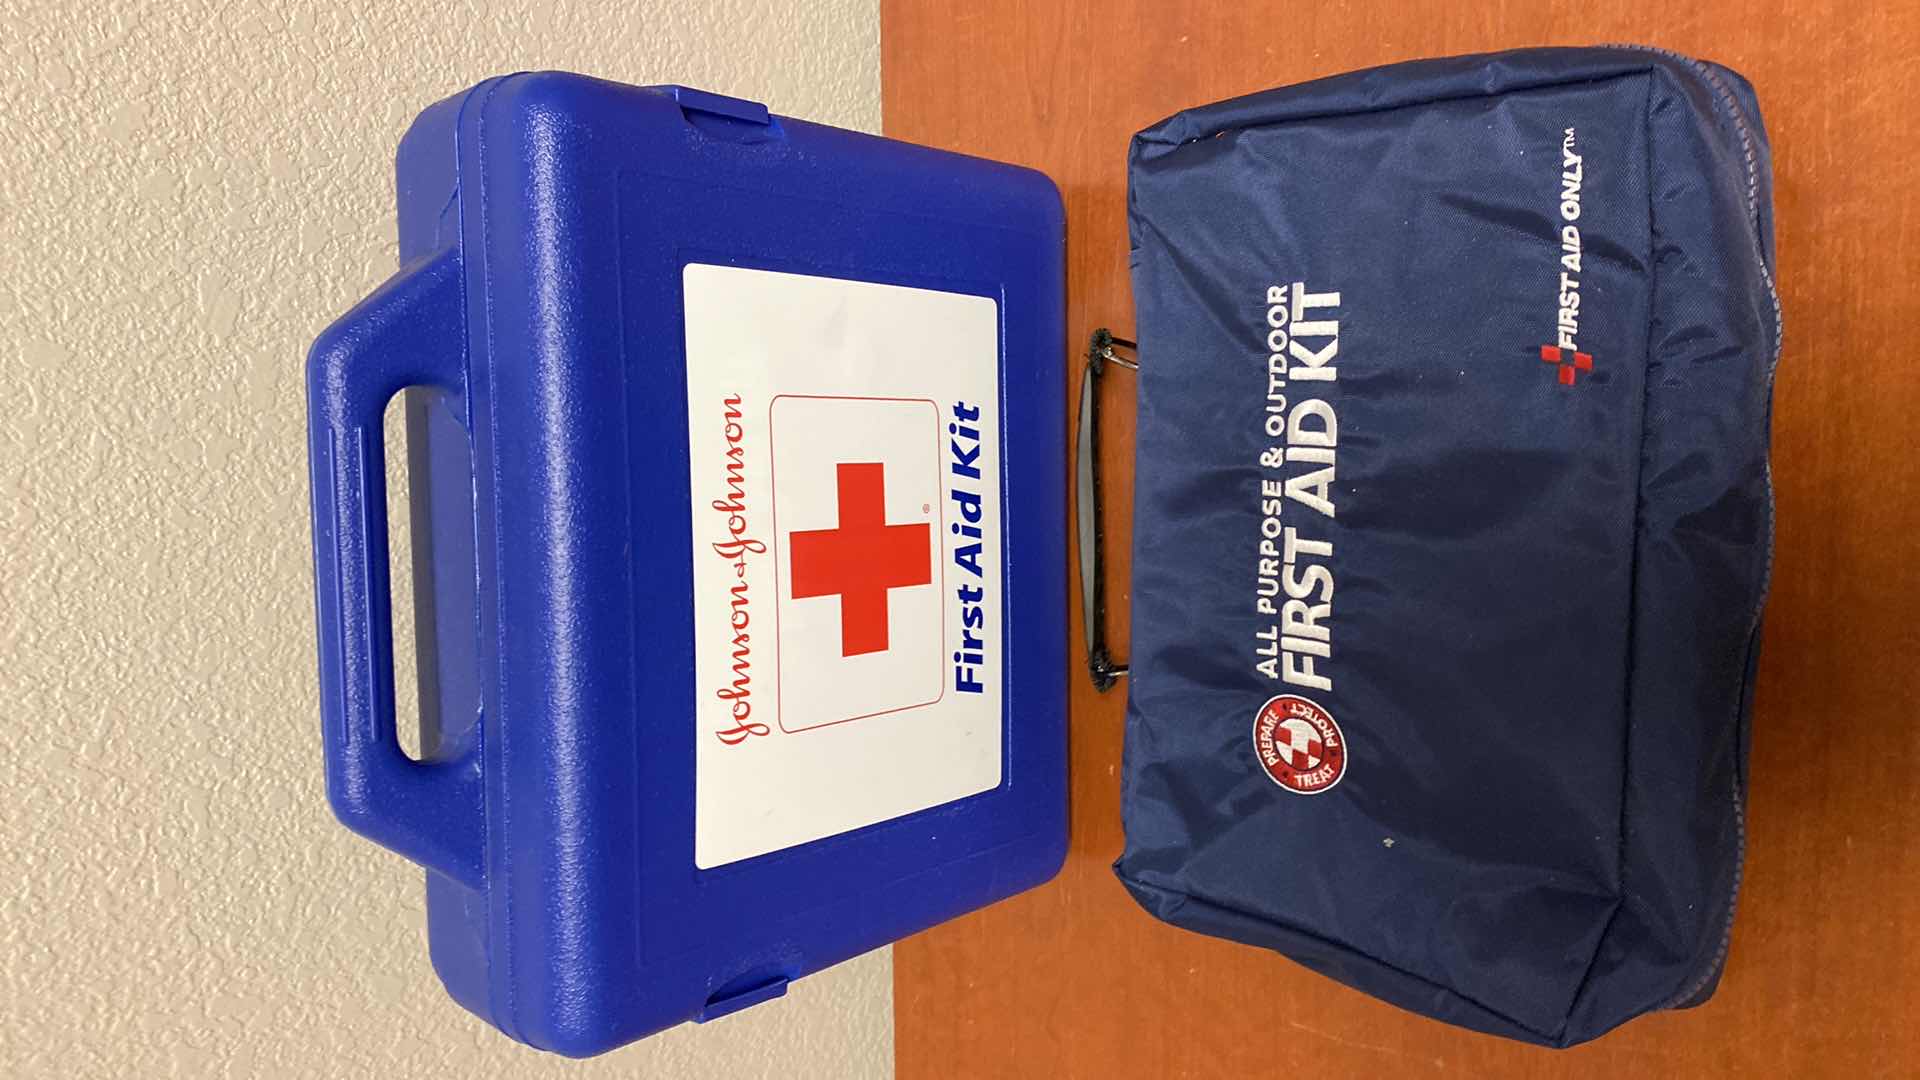 Photo 1 of 2-FIRST AID KITS